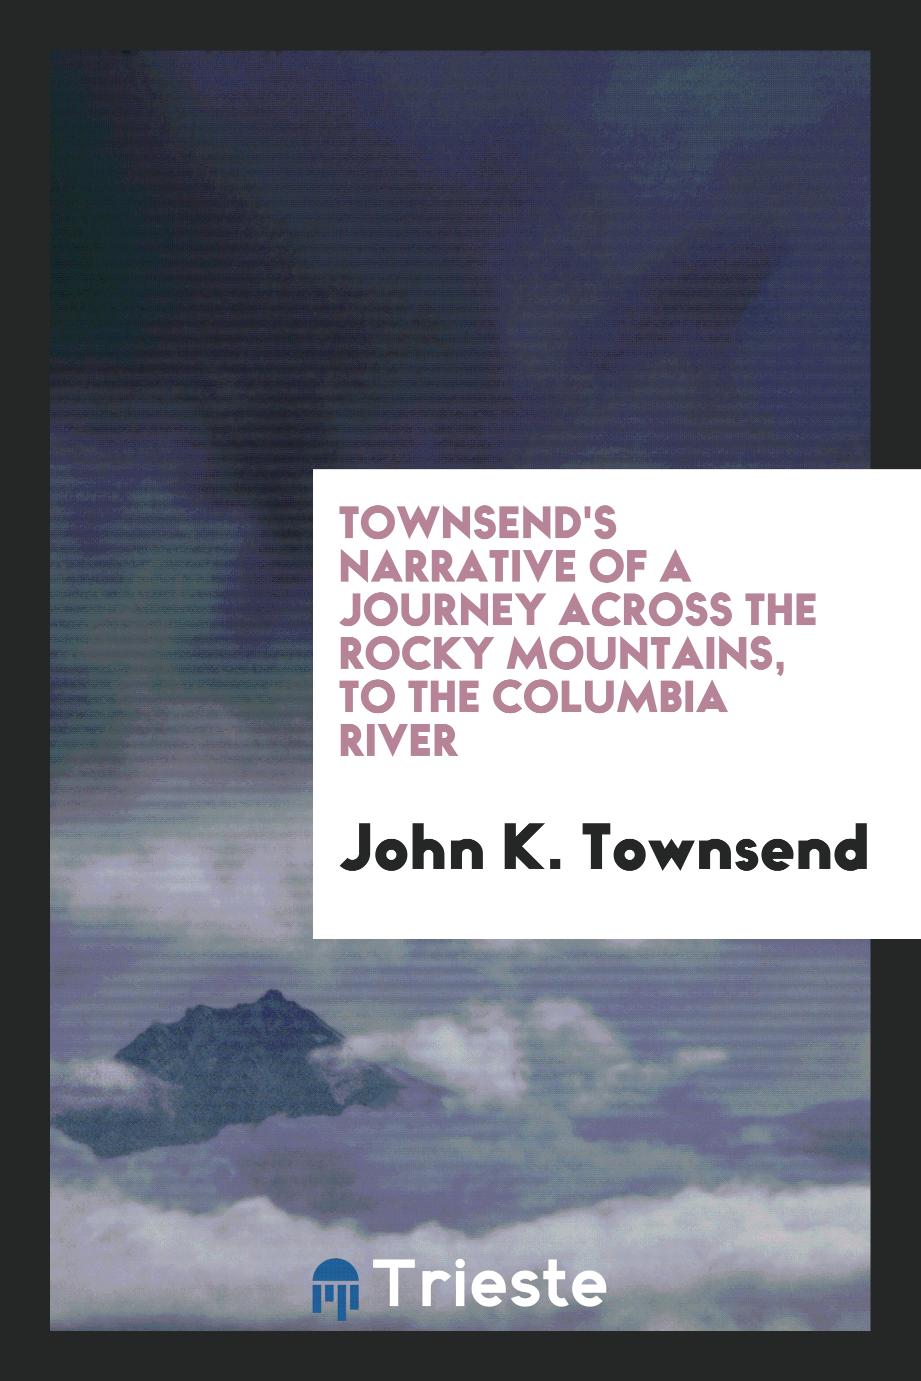 Townsend's Narrative of a journey across the Rocky Mountains, to the Columbia River